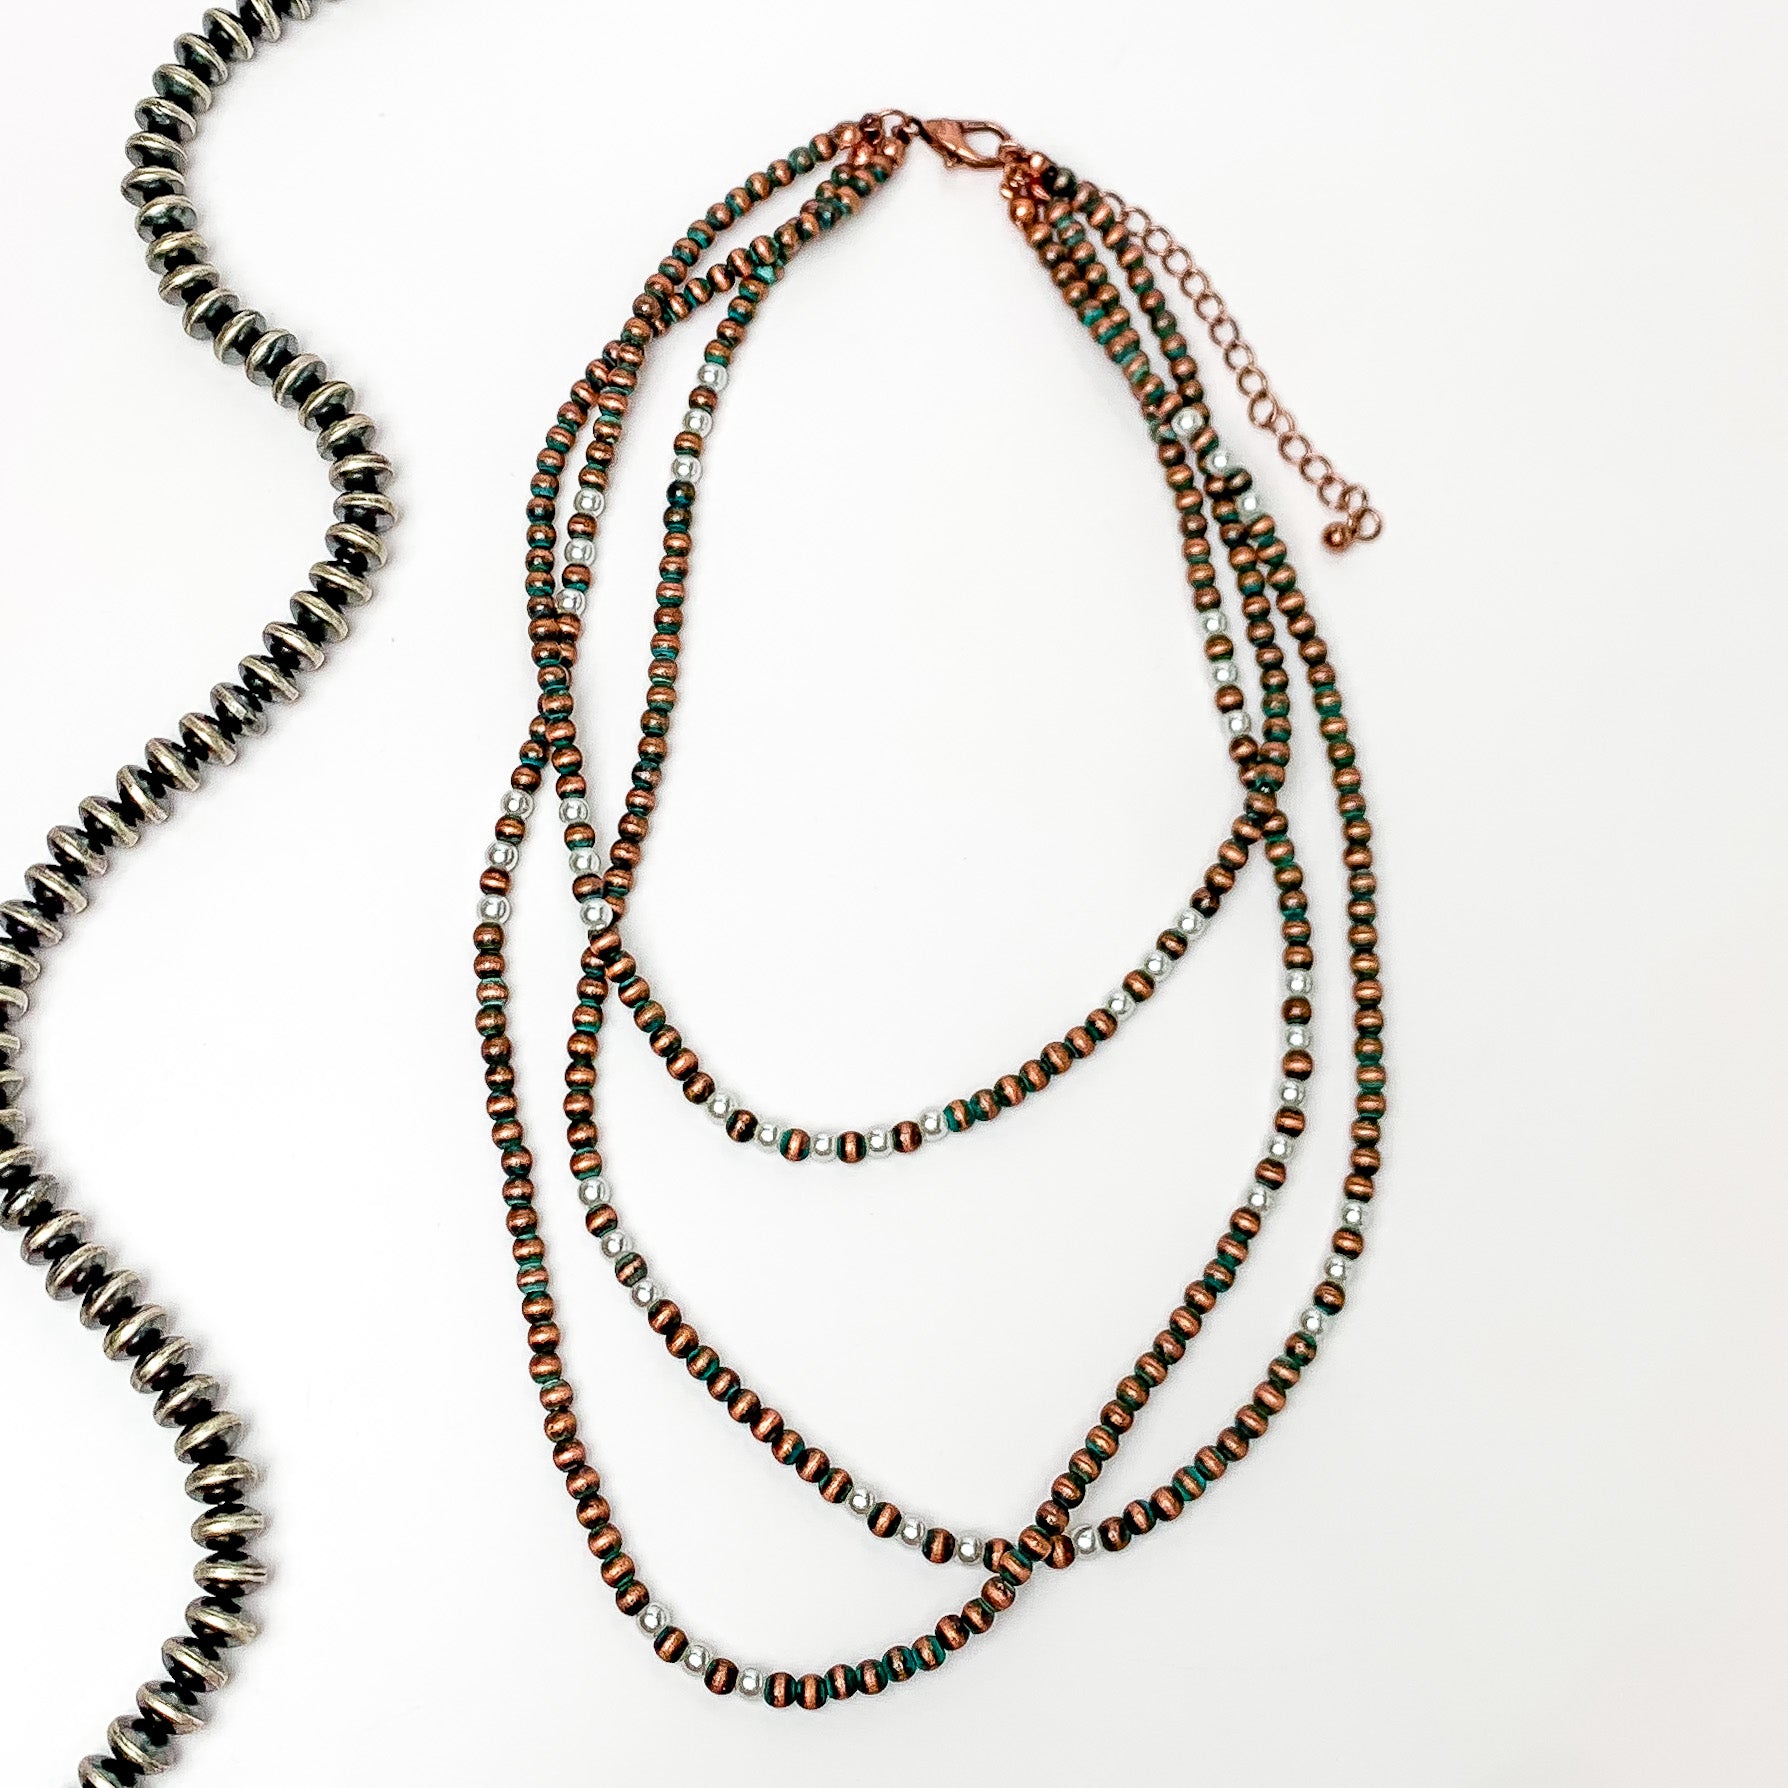 There stands of patina faux navajo pearls with white pearls as well. Pictures on a white background with a strand of silver beads to the left.